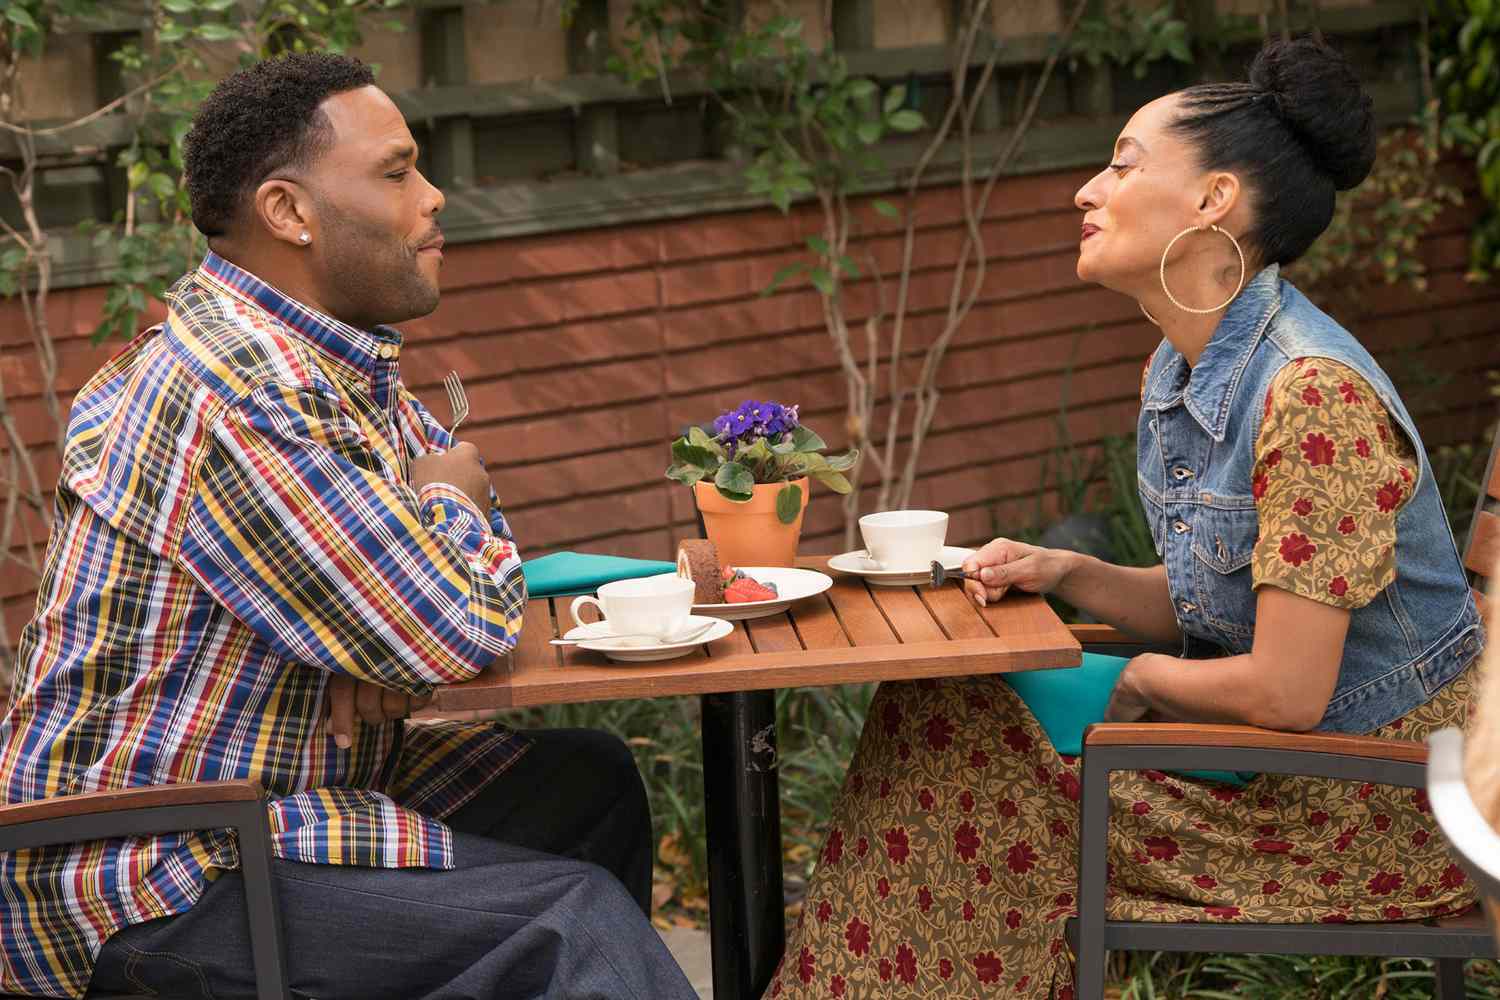 ANTHONY ANDERSON, TRACEE ELLIS ROSS